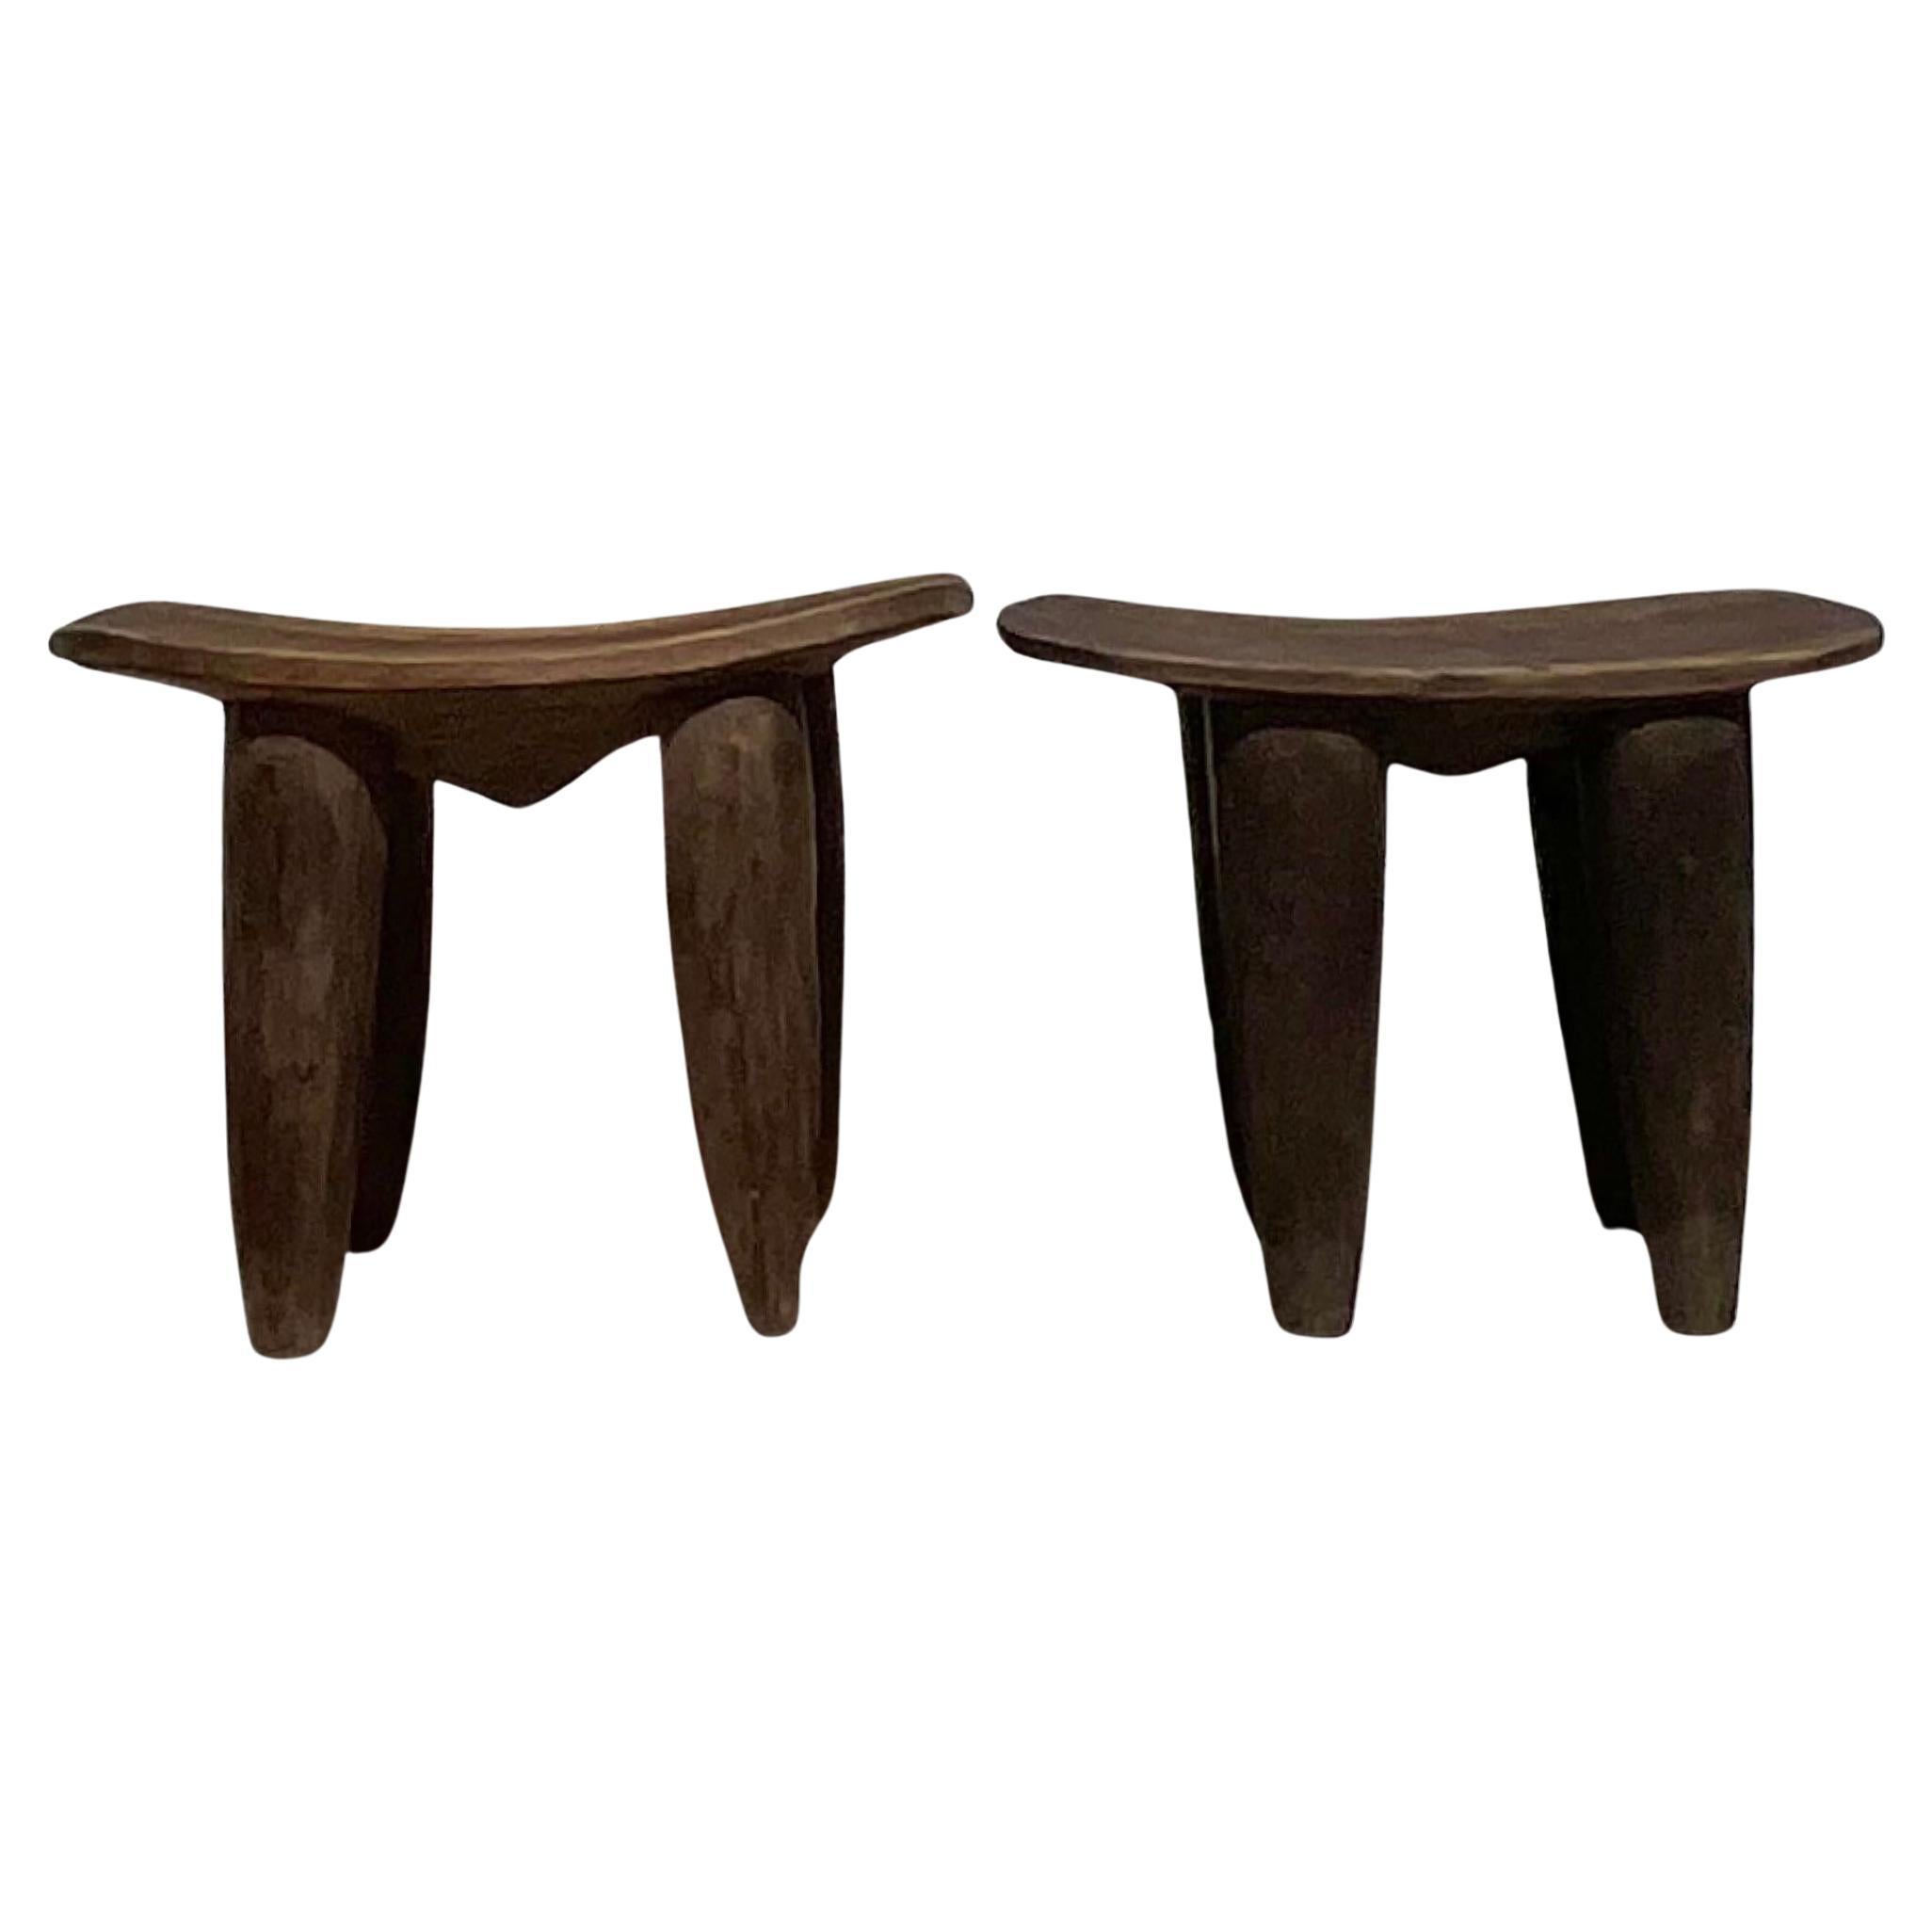 Late 20th Century Vintage Boho African Senufo Low Stools - a Pair For Sale